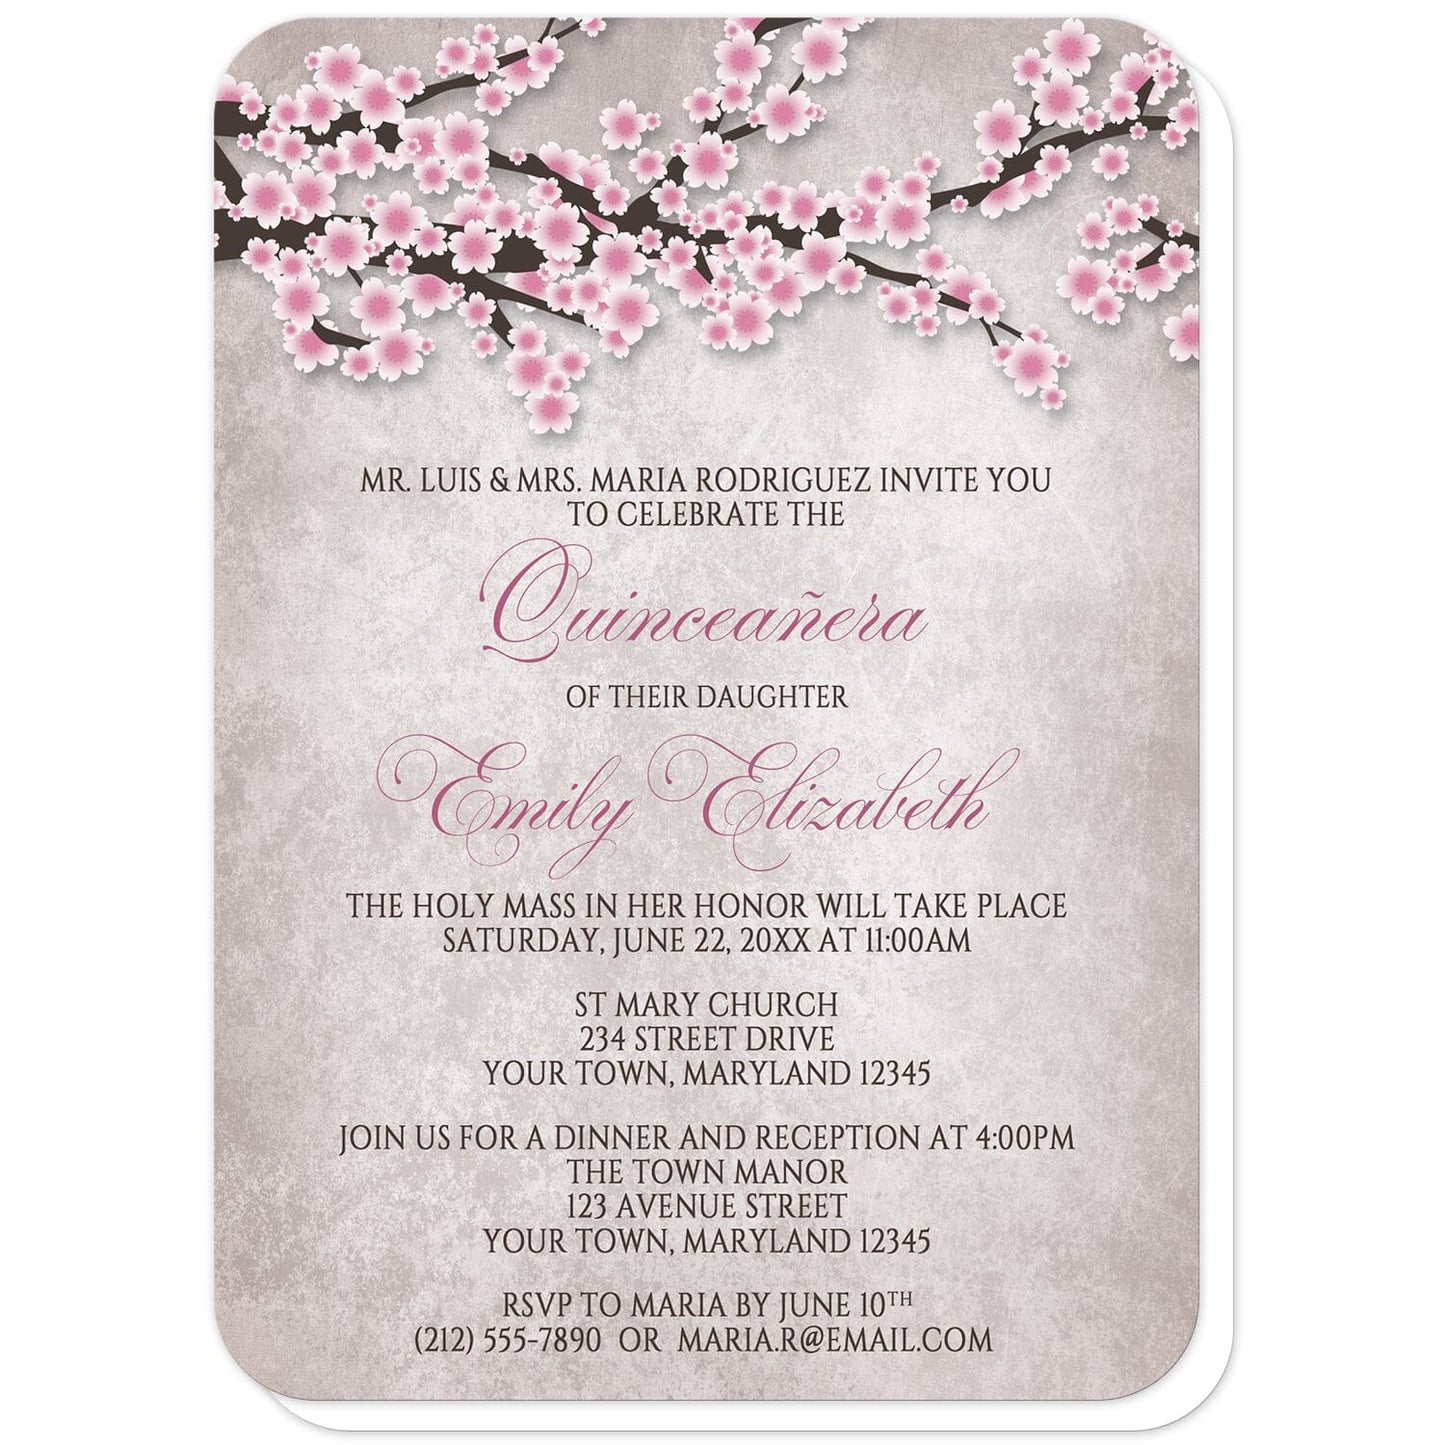 Rustic Pink Cherry Blossom Quinceañera Invitations (with rounded corners) at Artistically Invited. Rustic pink cherry blossom Quinceañera invitations featuring an illustration of pink and white with dark brown cherry blossom branches along the top. Your personalized 15th birthday party details are custom printed in pink and dark brown over a stony grayish brown background below the pretty cherry blossom branches. 